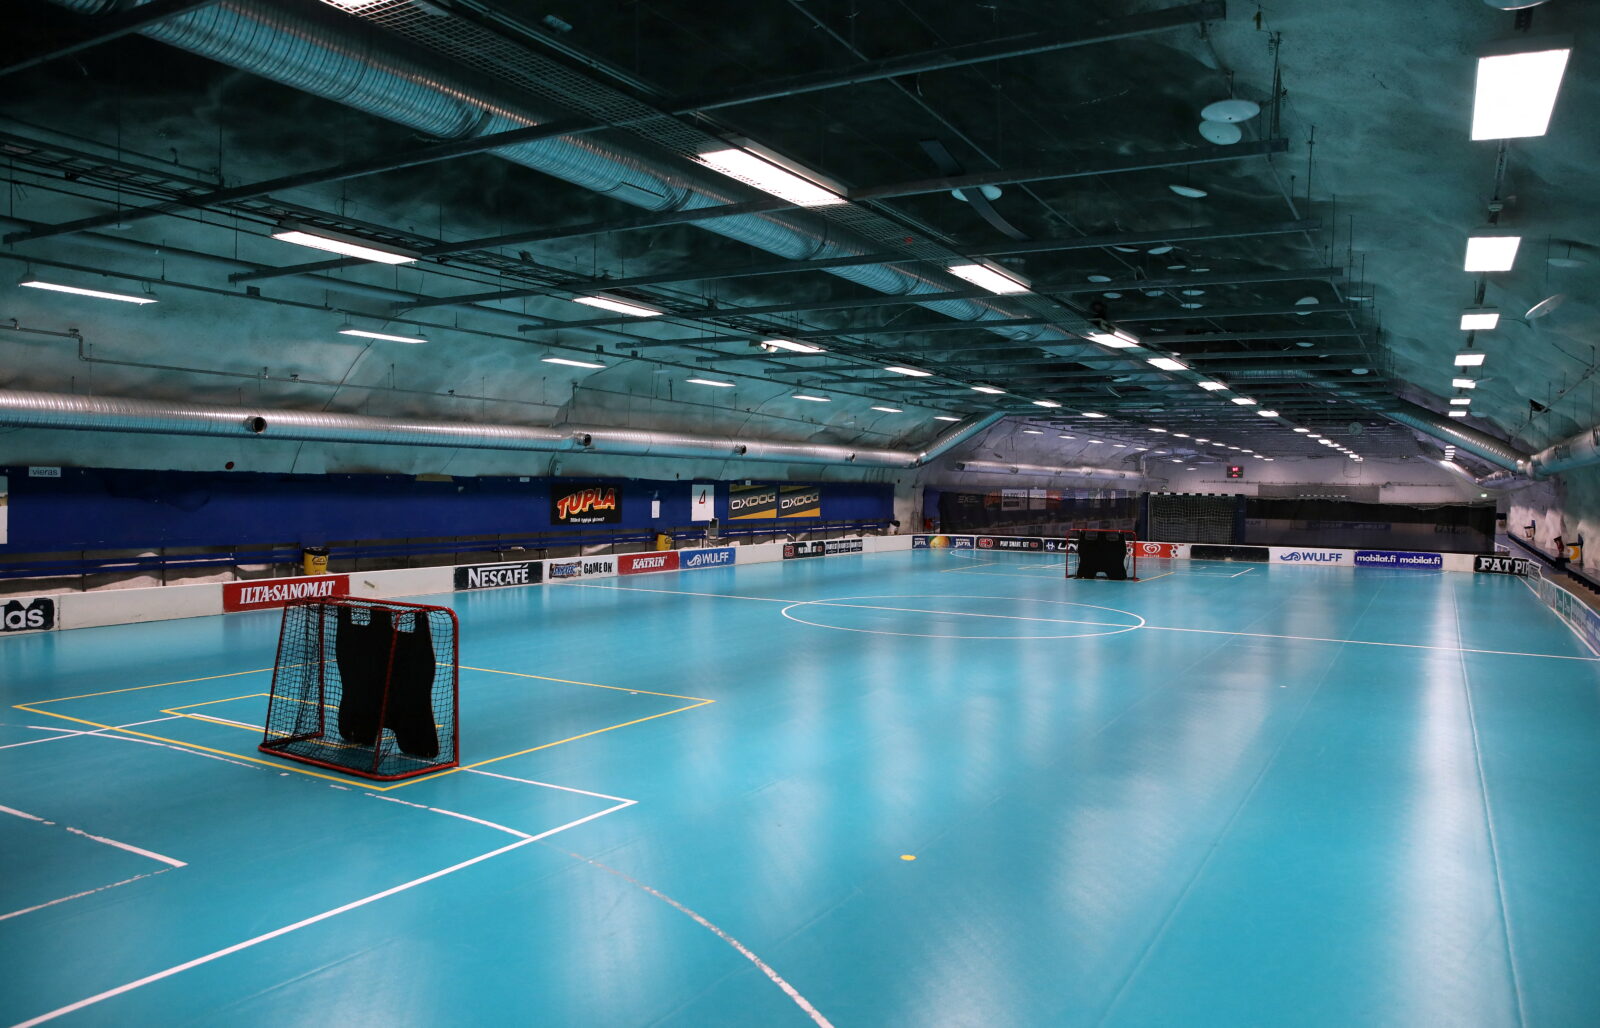 Helsinki sports hall that can be turned into an underground shelter